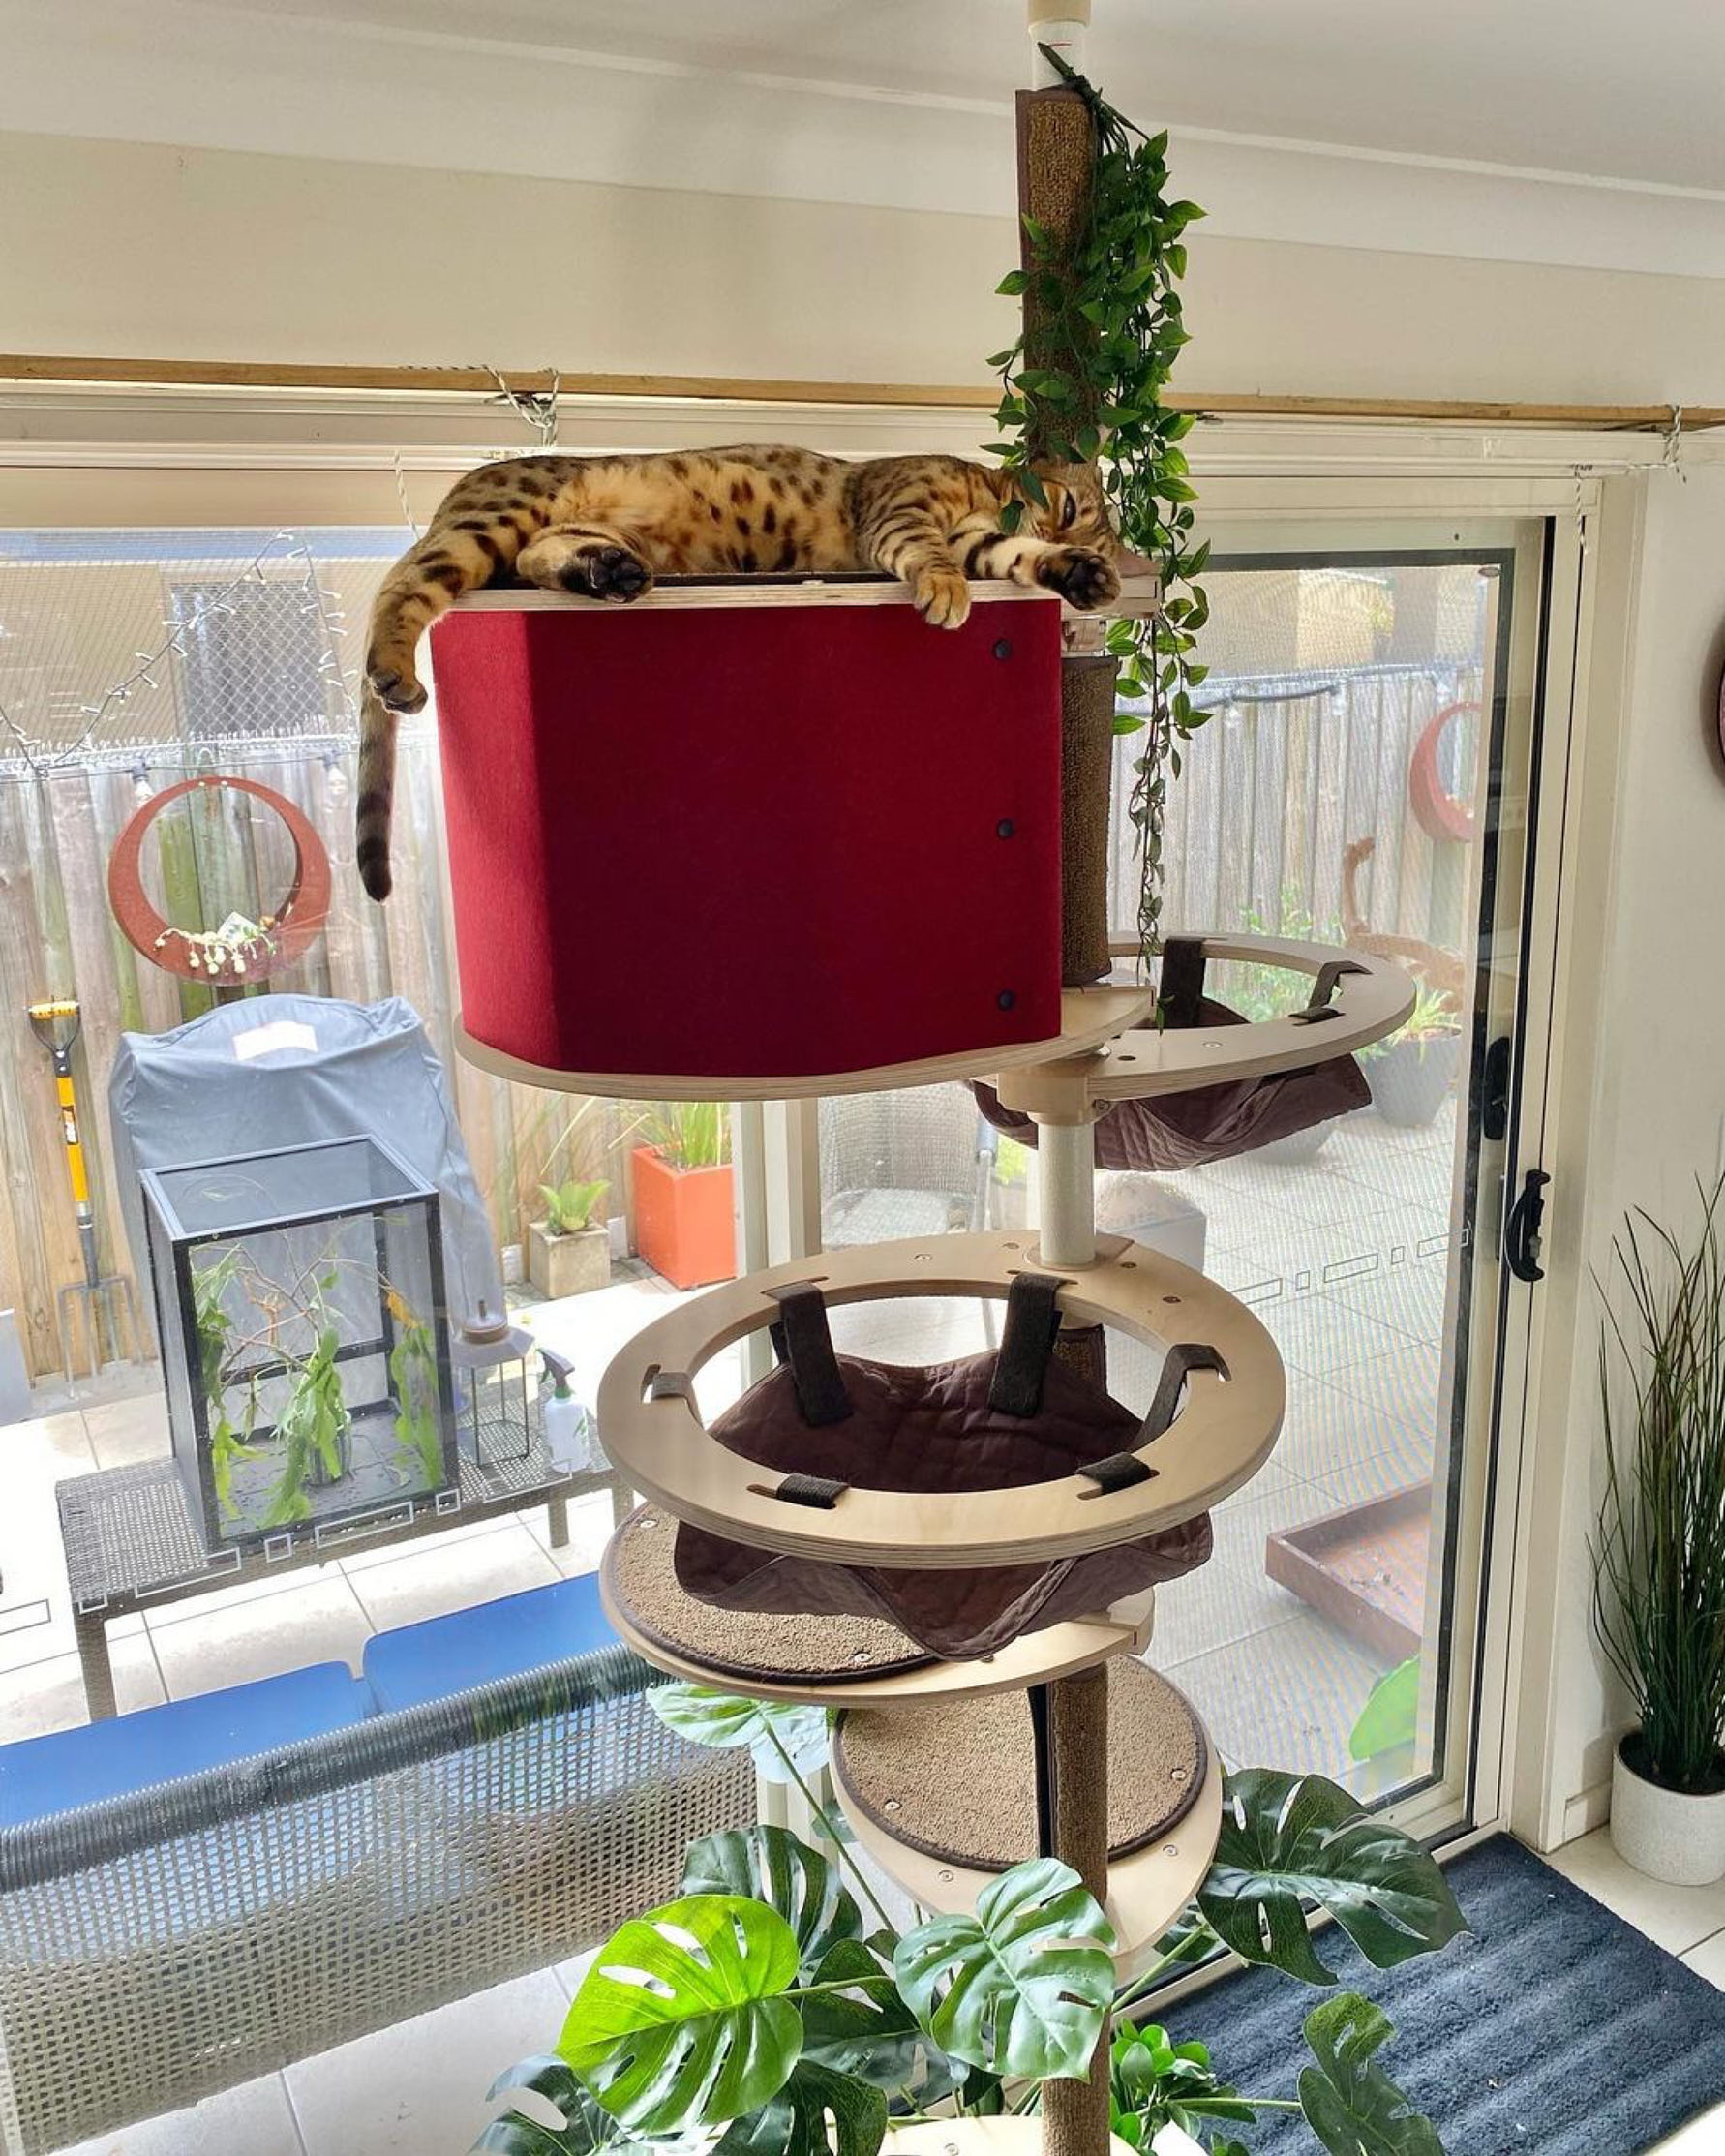 floor to ceiling cat tree for a multi-cat household